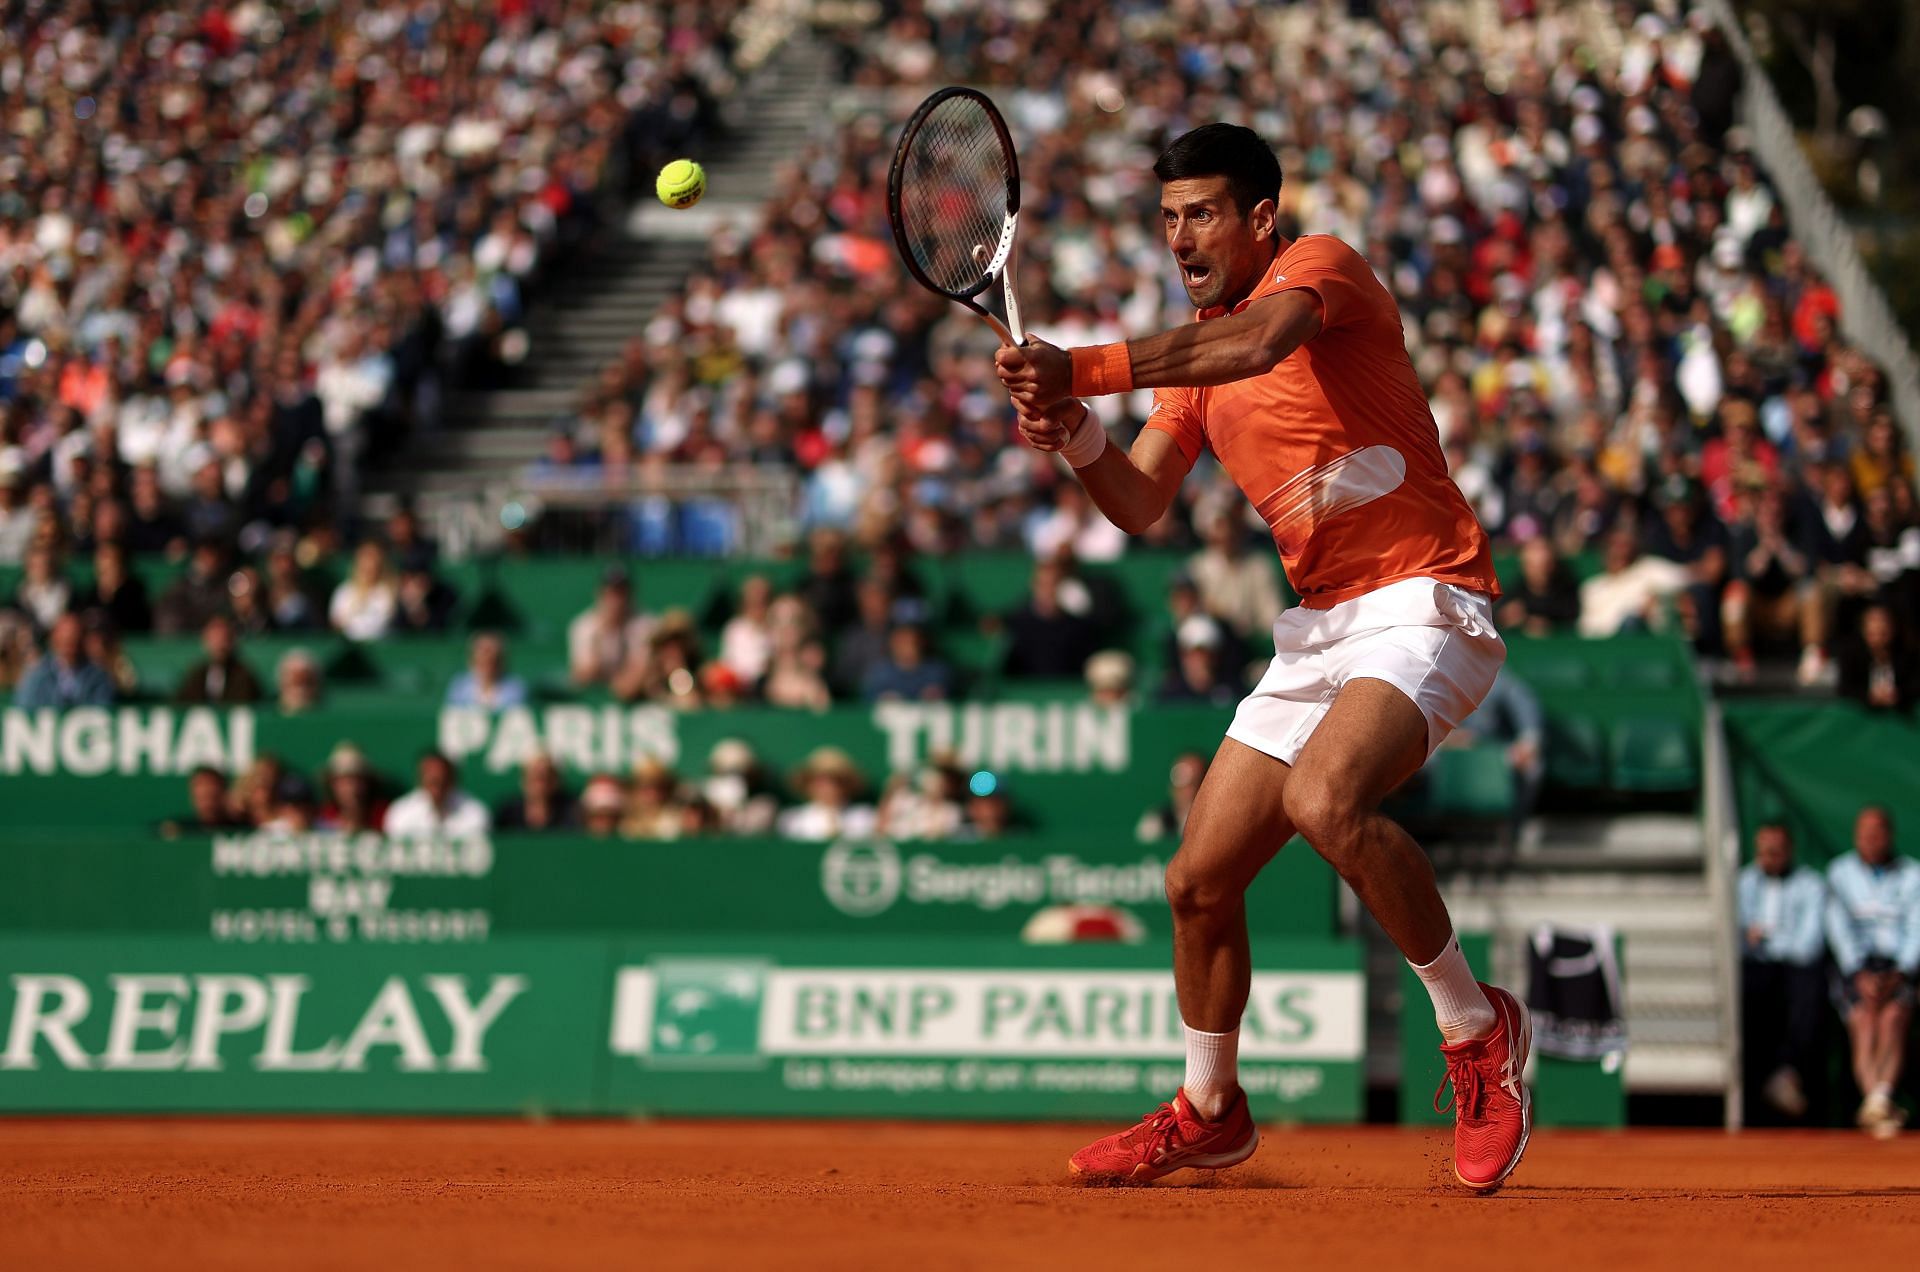 Novak Djokovic suffered a defeat in his first match at the 2022 Monte-Carlo Masters